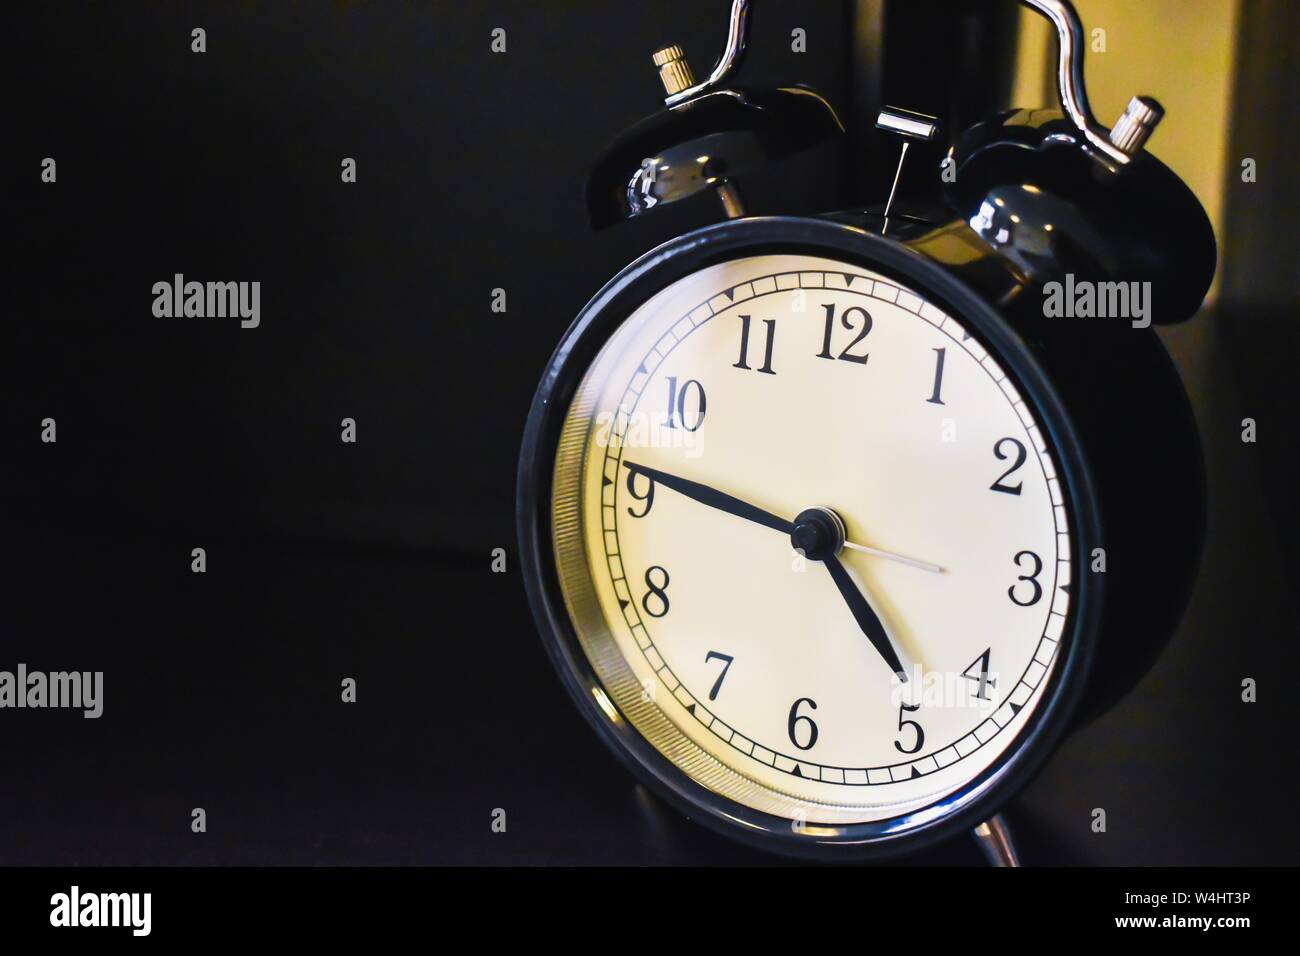 Vintage style black and white alarm clock with dark background. Stock Photo